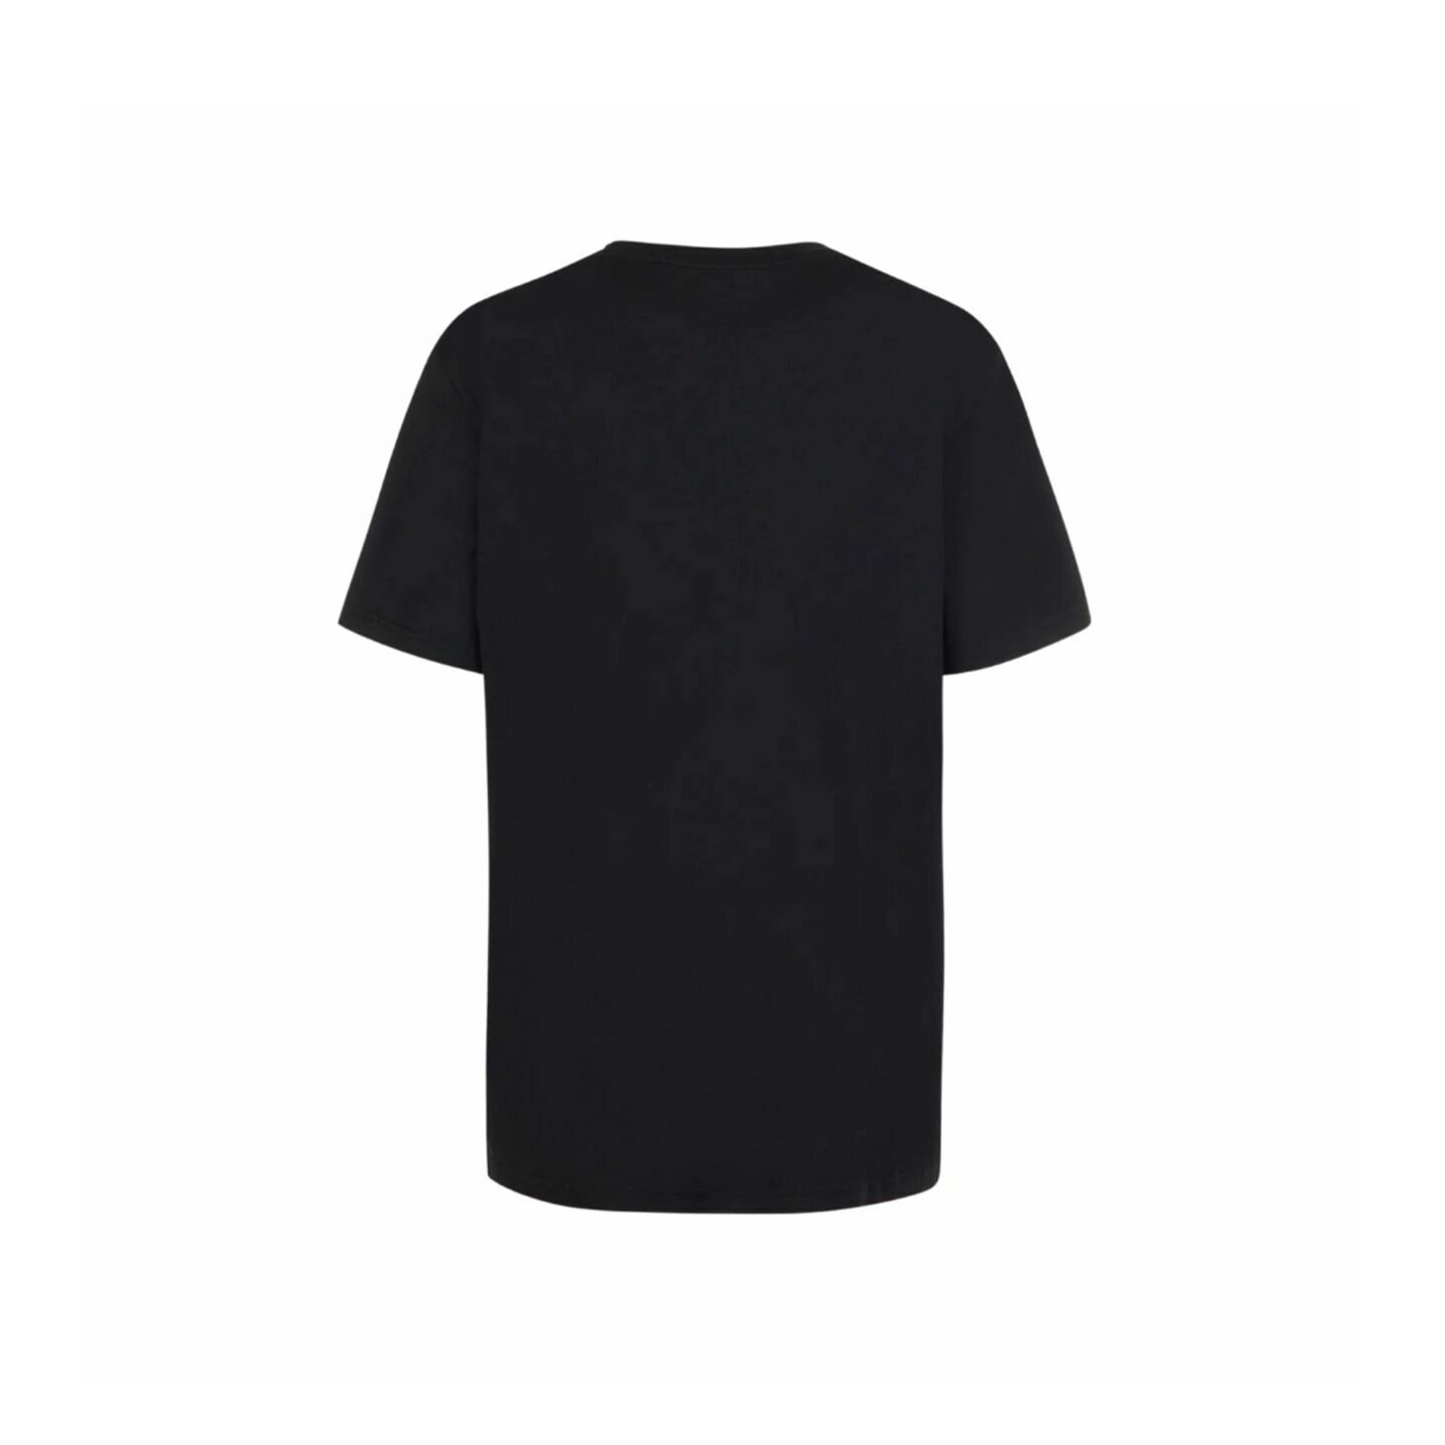 Givenchy Bambi Print Tee Black (Oversize Fit)